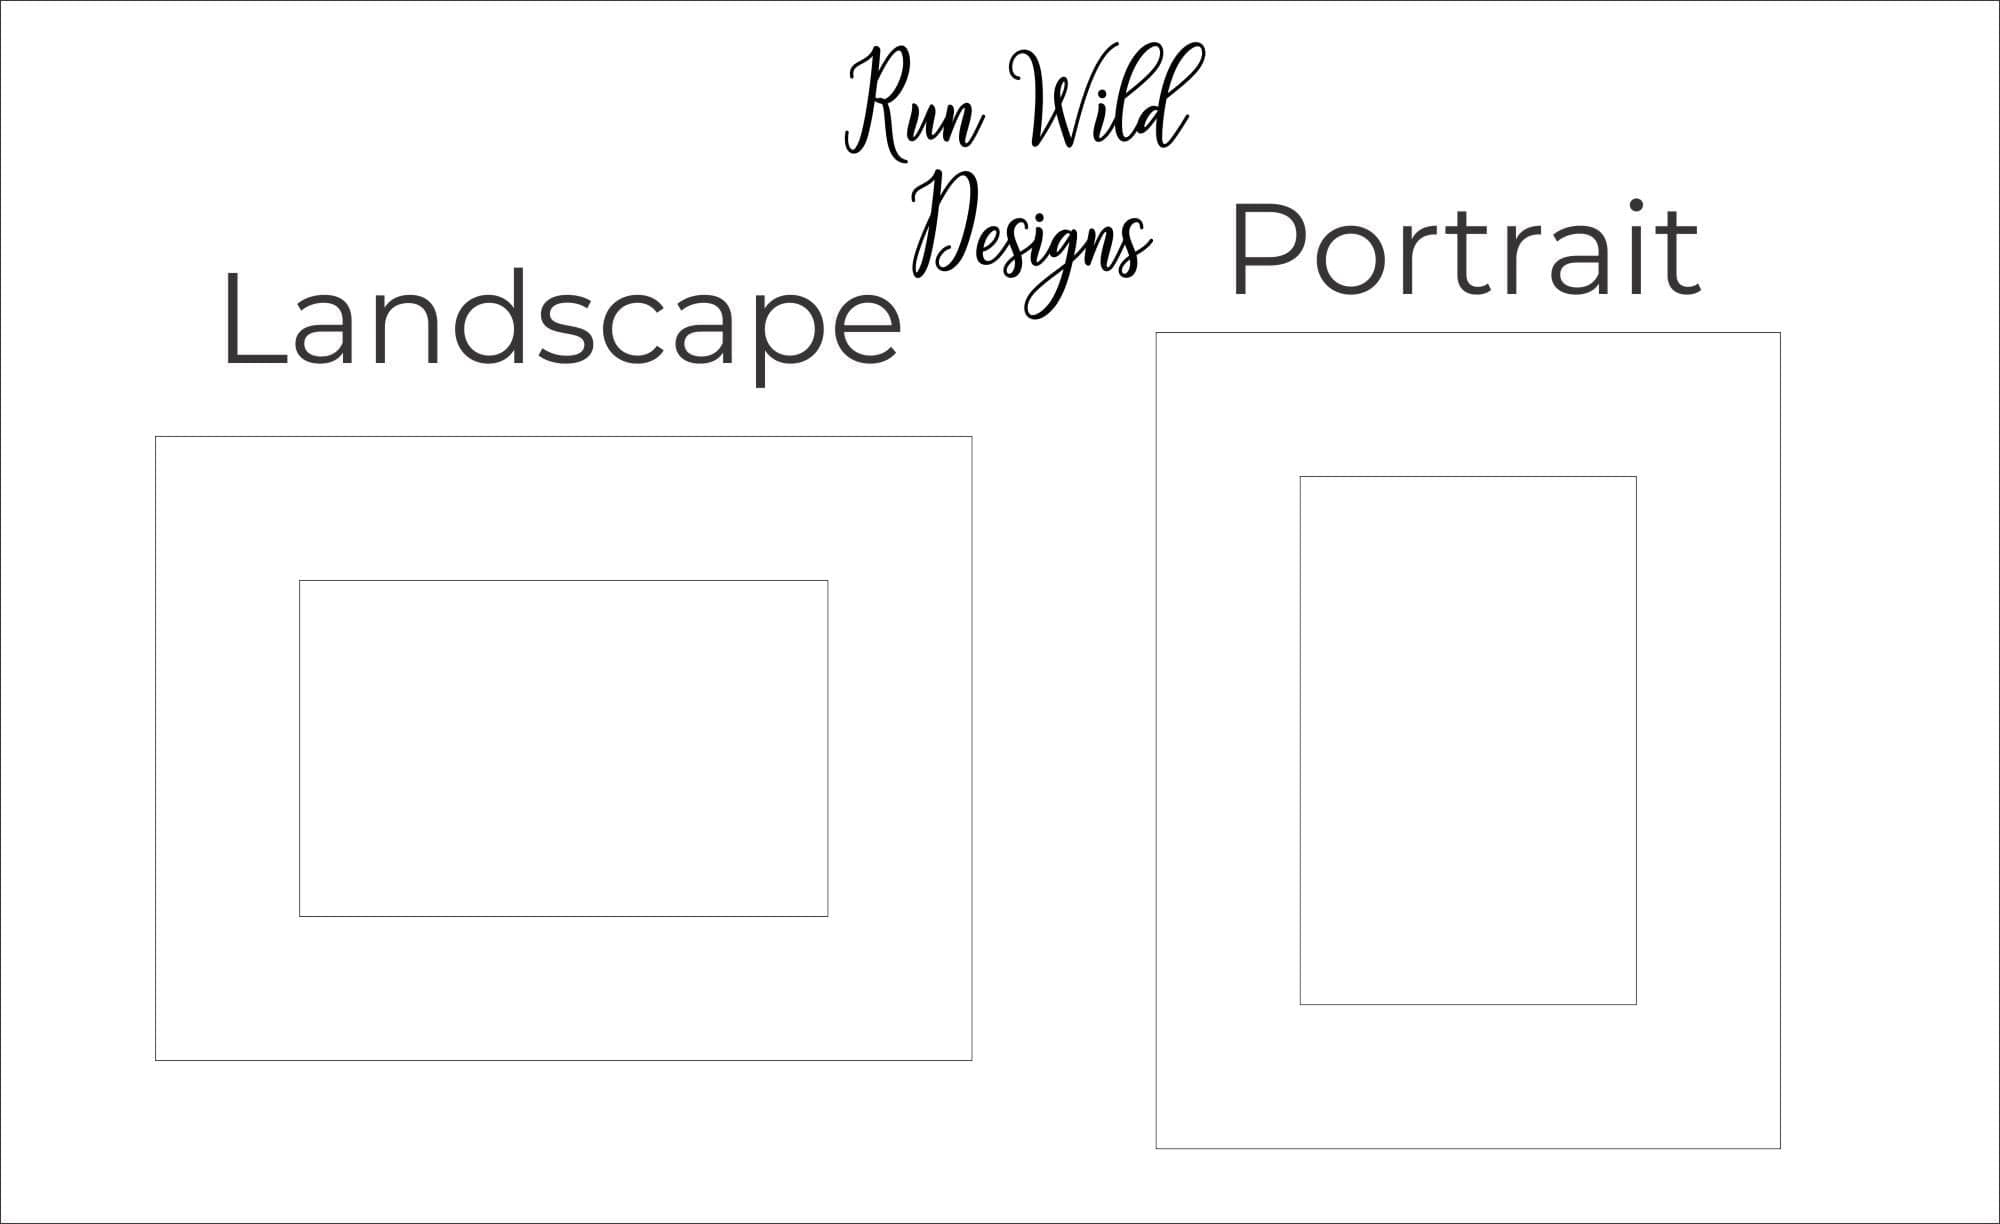 Run Wild Engraving picture frame name and date Mr & Mrs Wood Engraved Wedding Frame